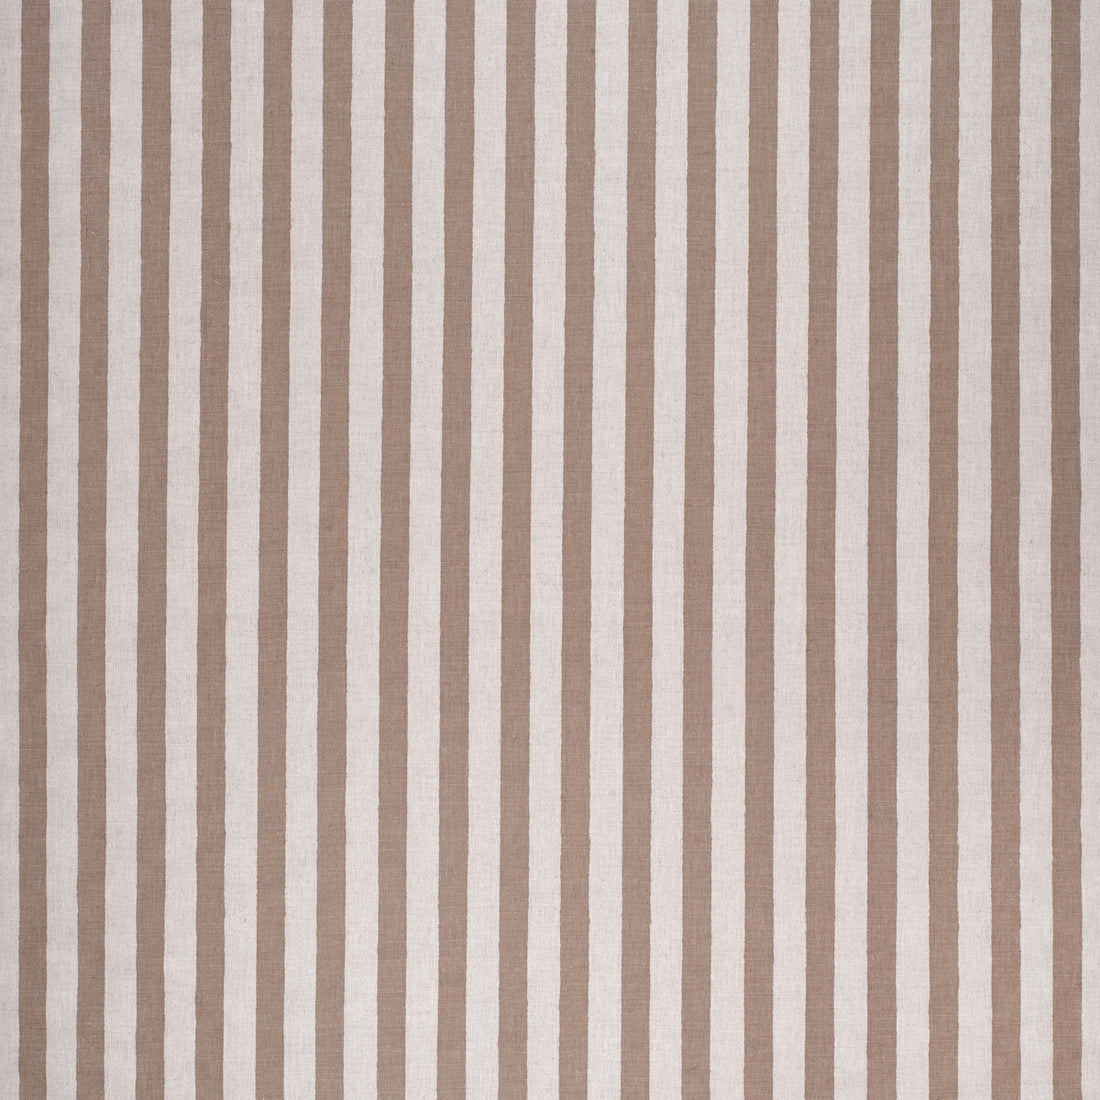 Melba Stripe fabric in brown/ecru color - pattern 2020146.1616.0 - by Lee Jofa in the Paolo Moschino Fabrics collection